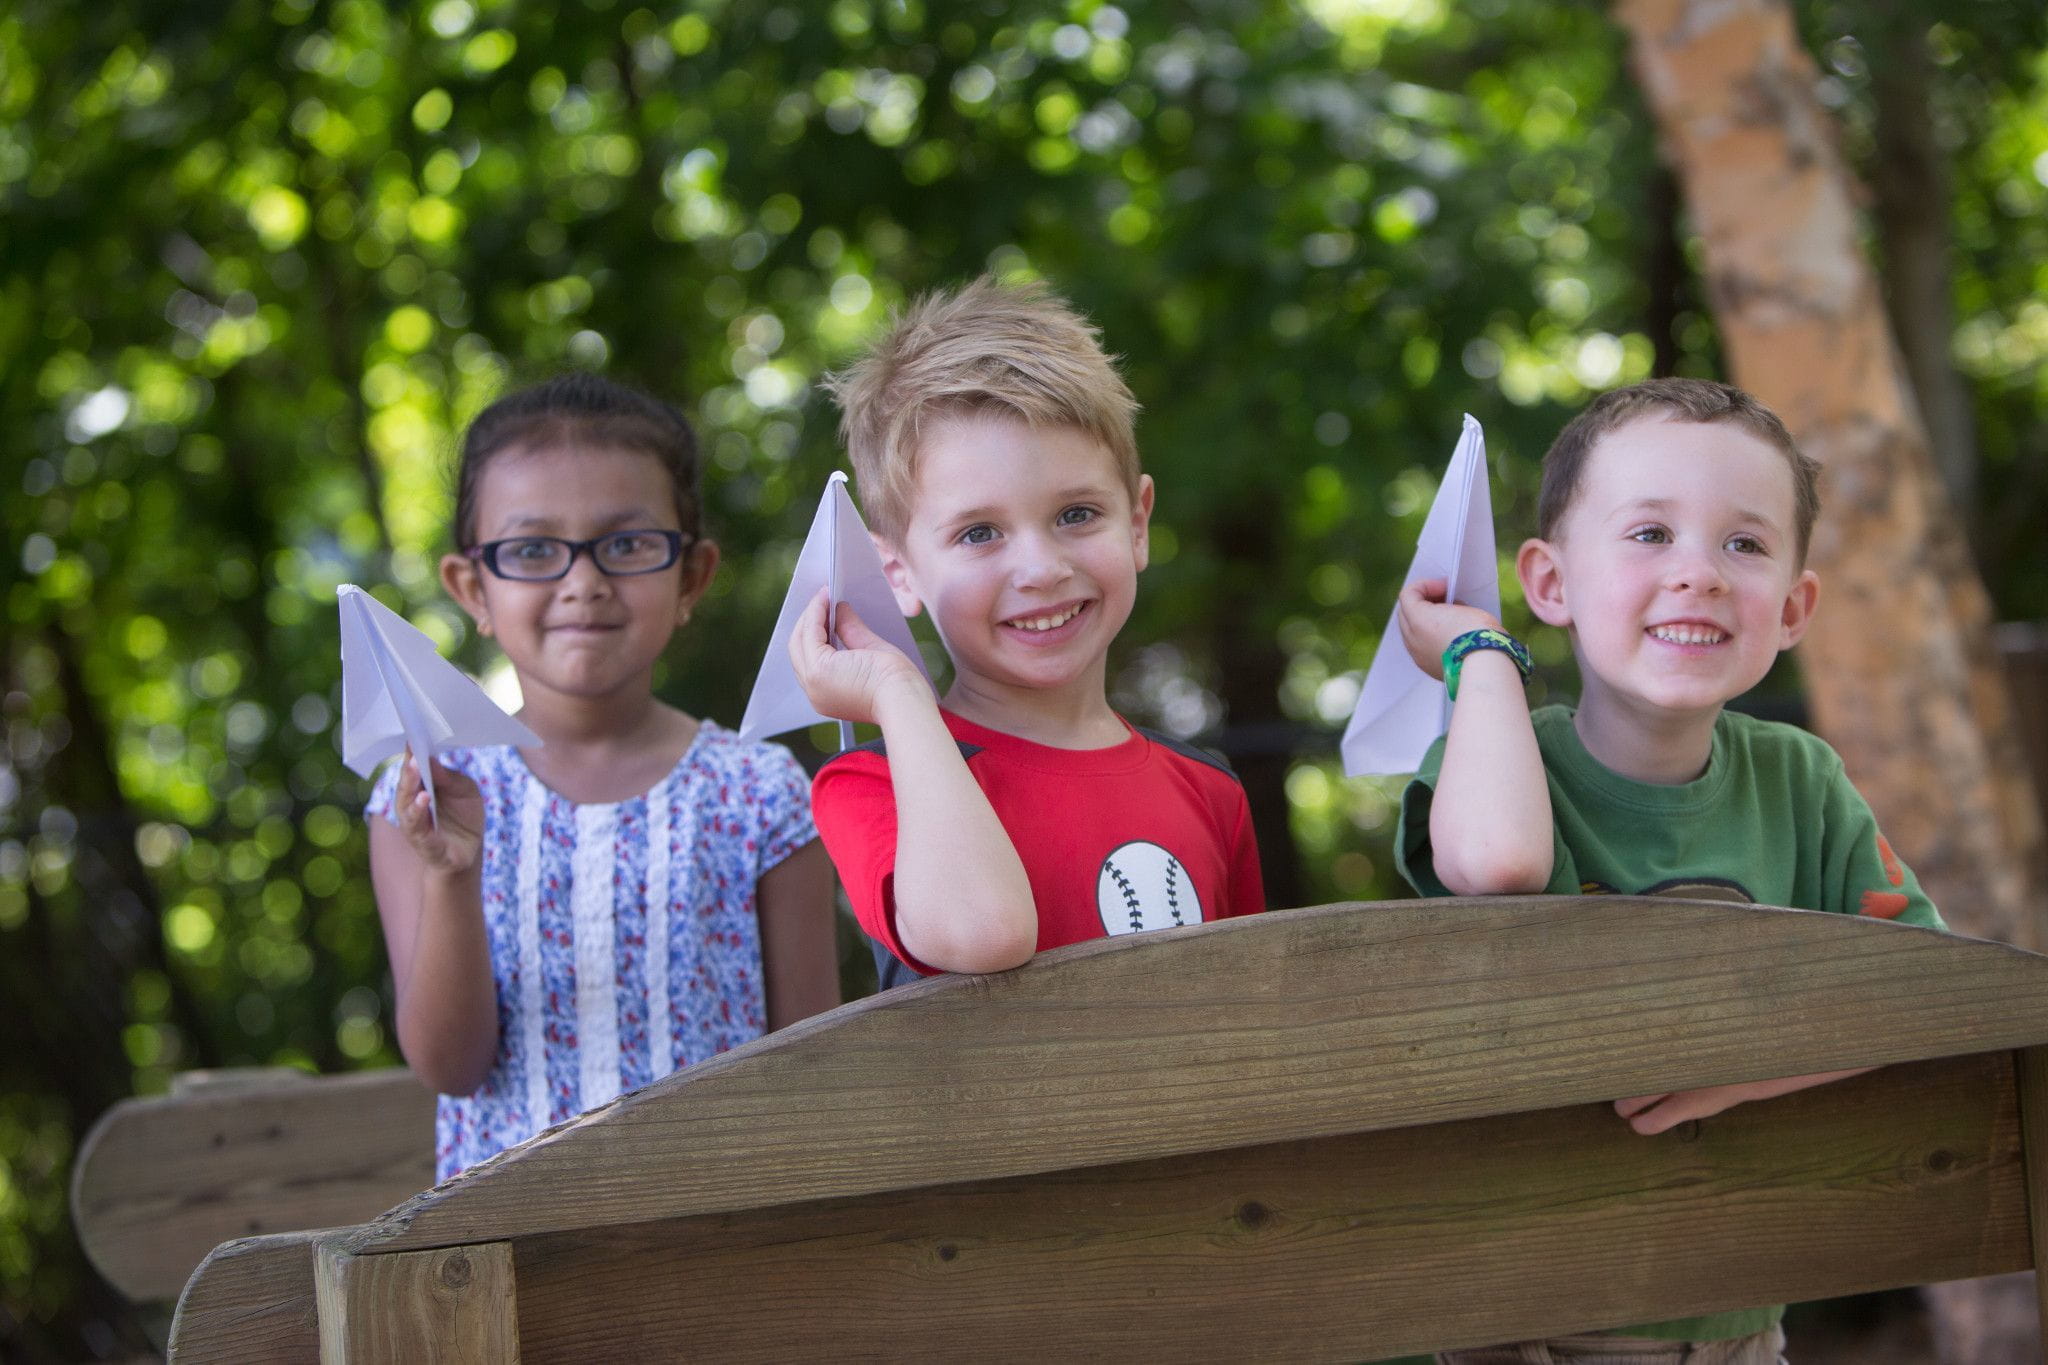 3 children smiling and playing outside with paper airplanes